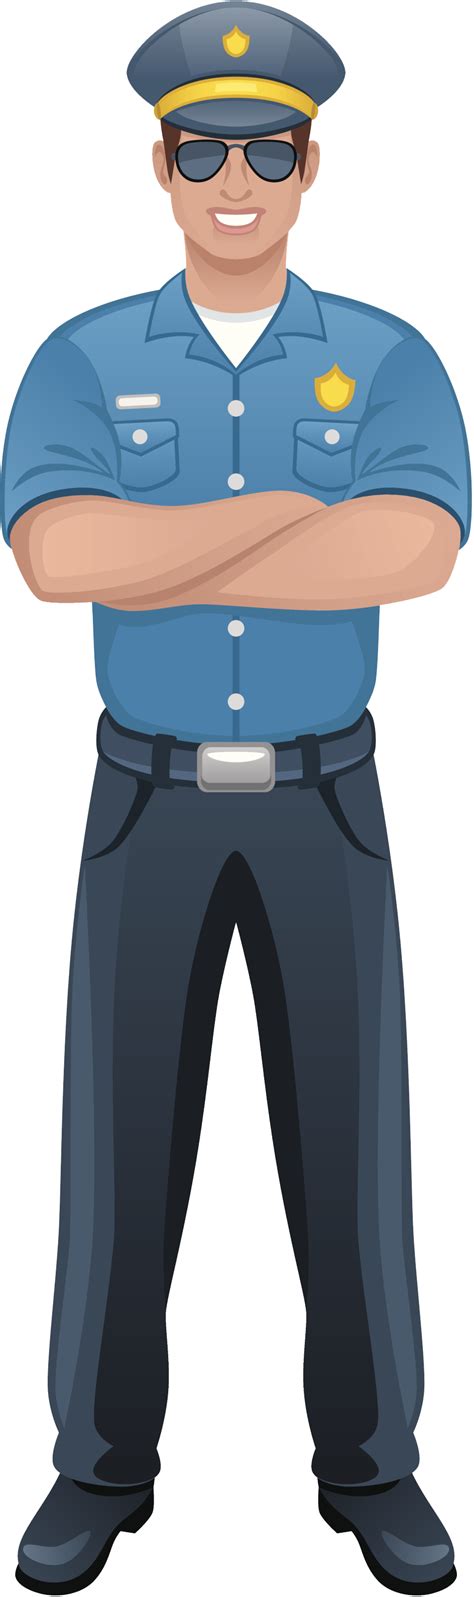 Policeman Png Transparent Image Download Size 944x3181px